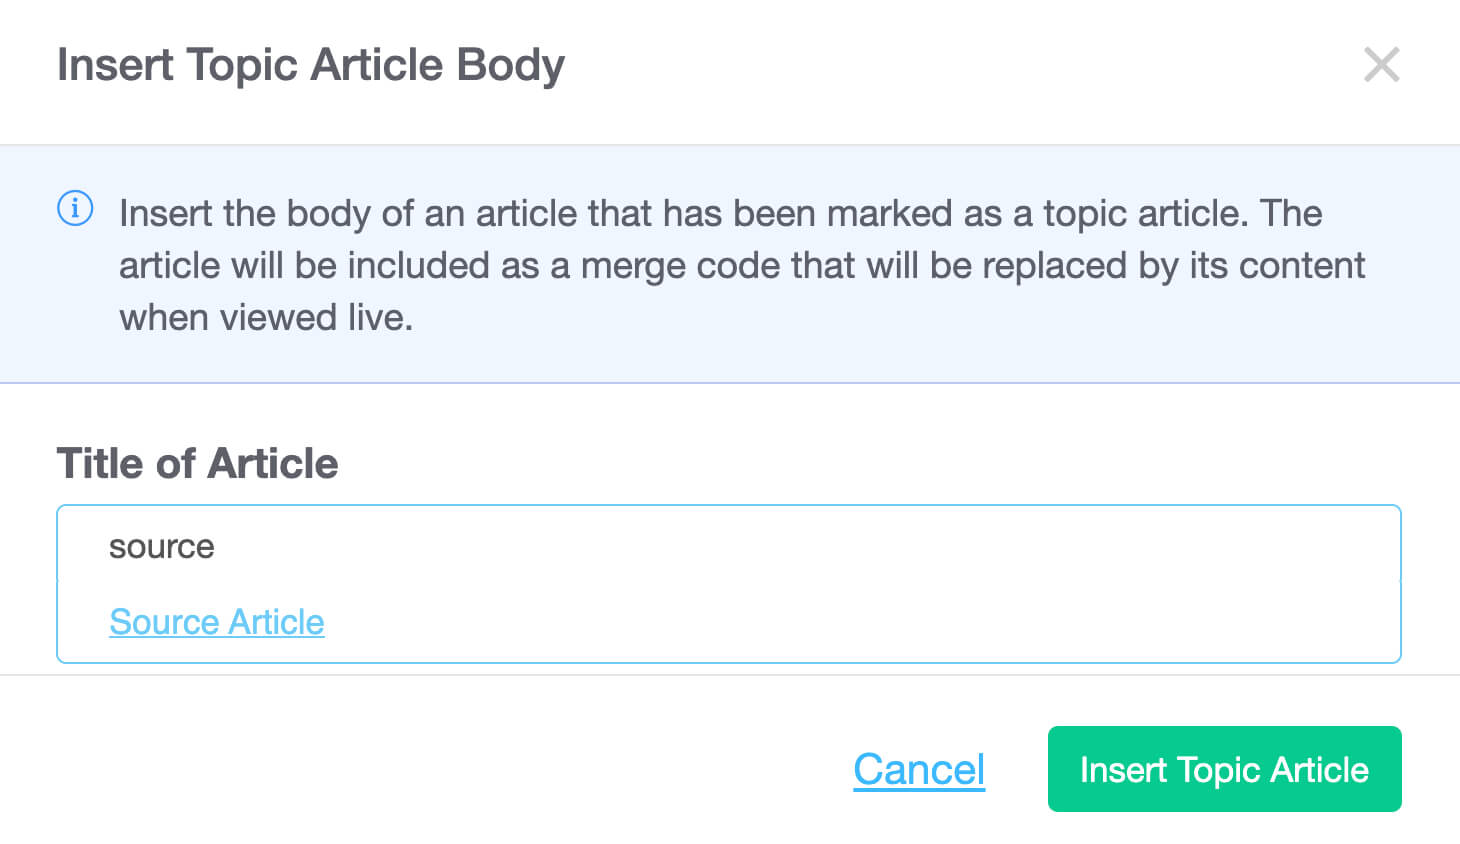 Screenshot of KnowledgeOwl interface, showing the modal to find and insert a topic article.